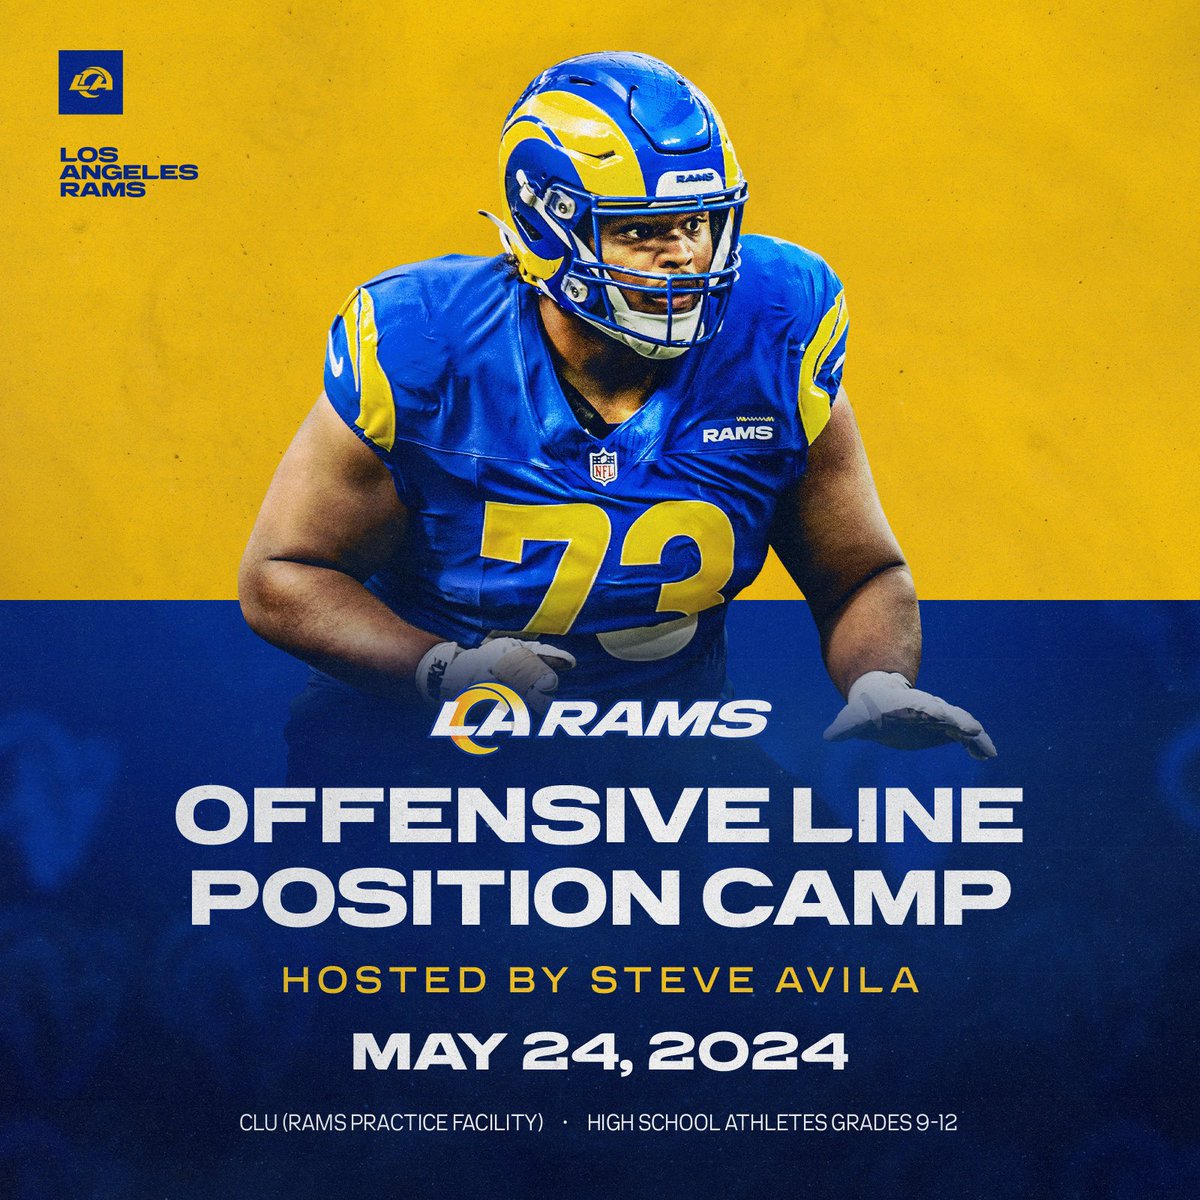 🗣️ Calling all Offensive Lineman @Stevelavila x @RamsNFL Offensive Line Position Camp on Friday, May 24th at the Rams Practice Facility! » bit.ly/4dngufD